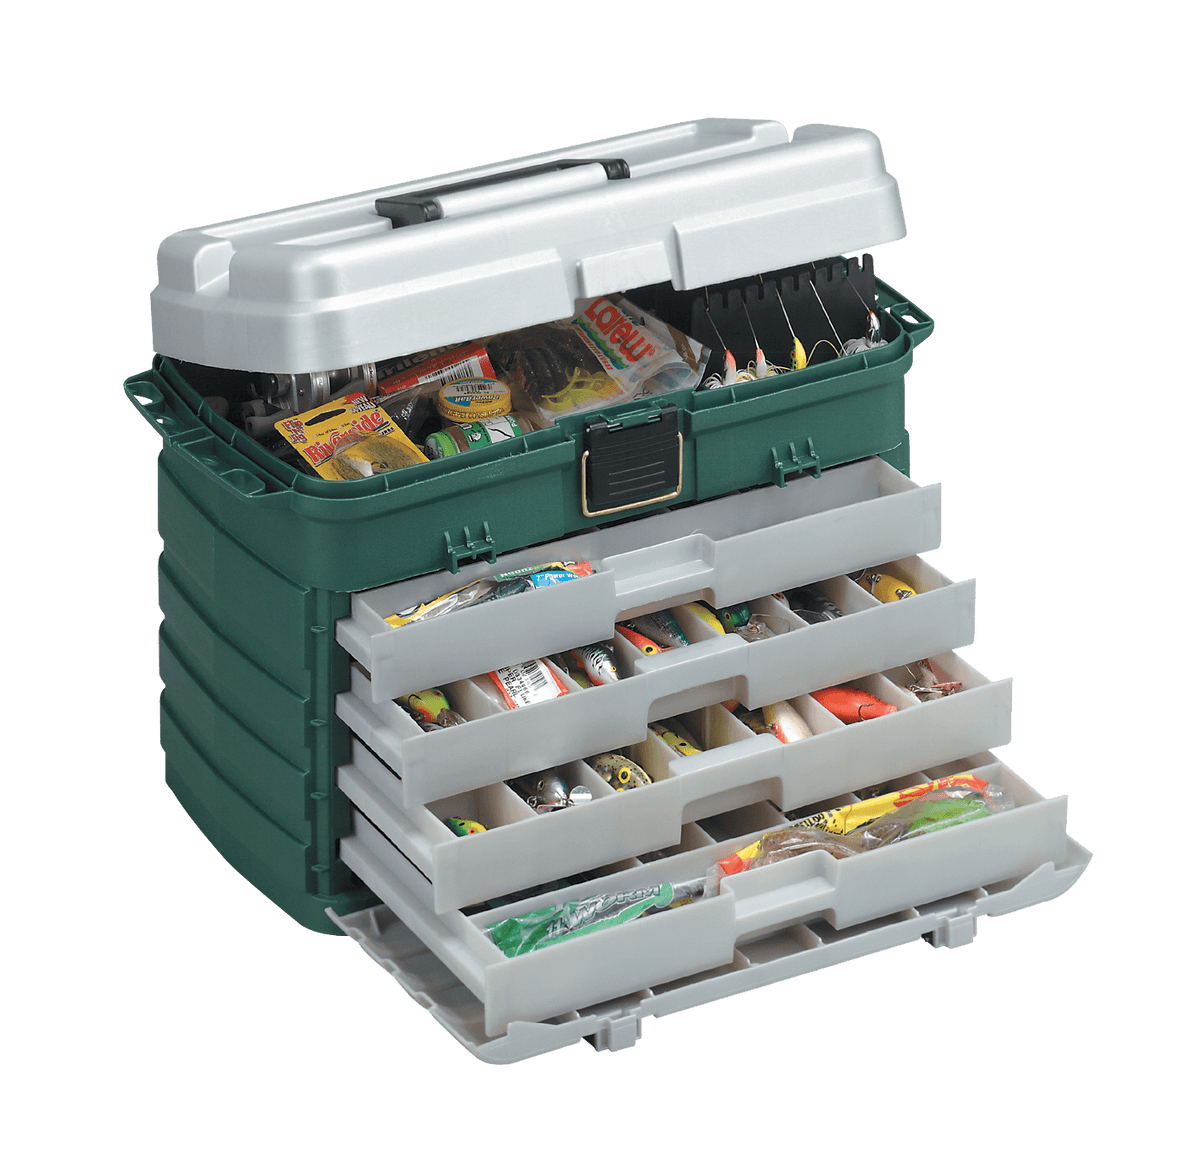 Plano Four-Drawer Tackle Box